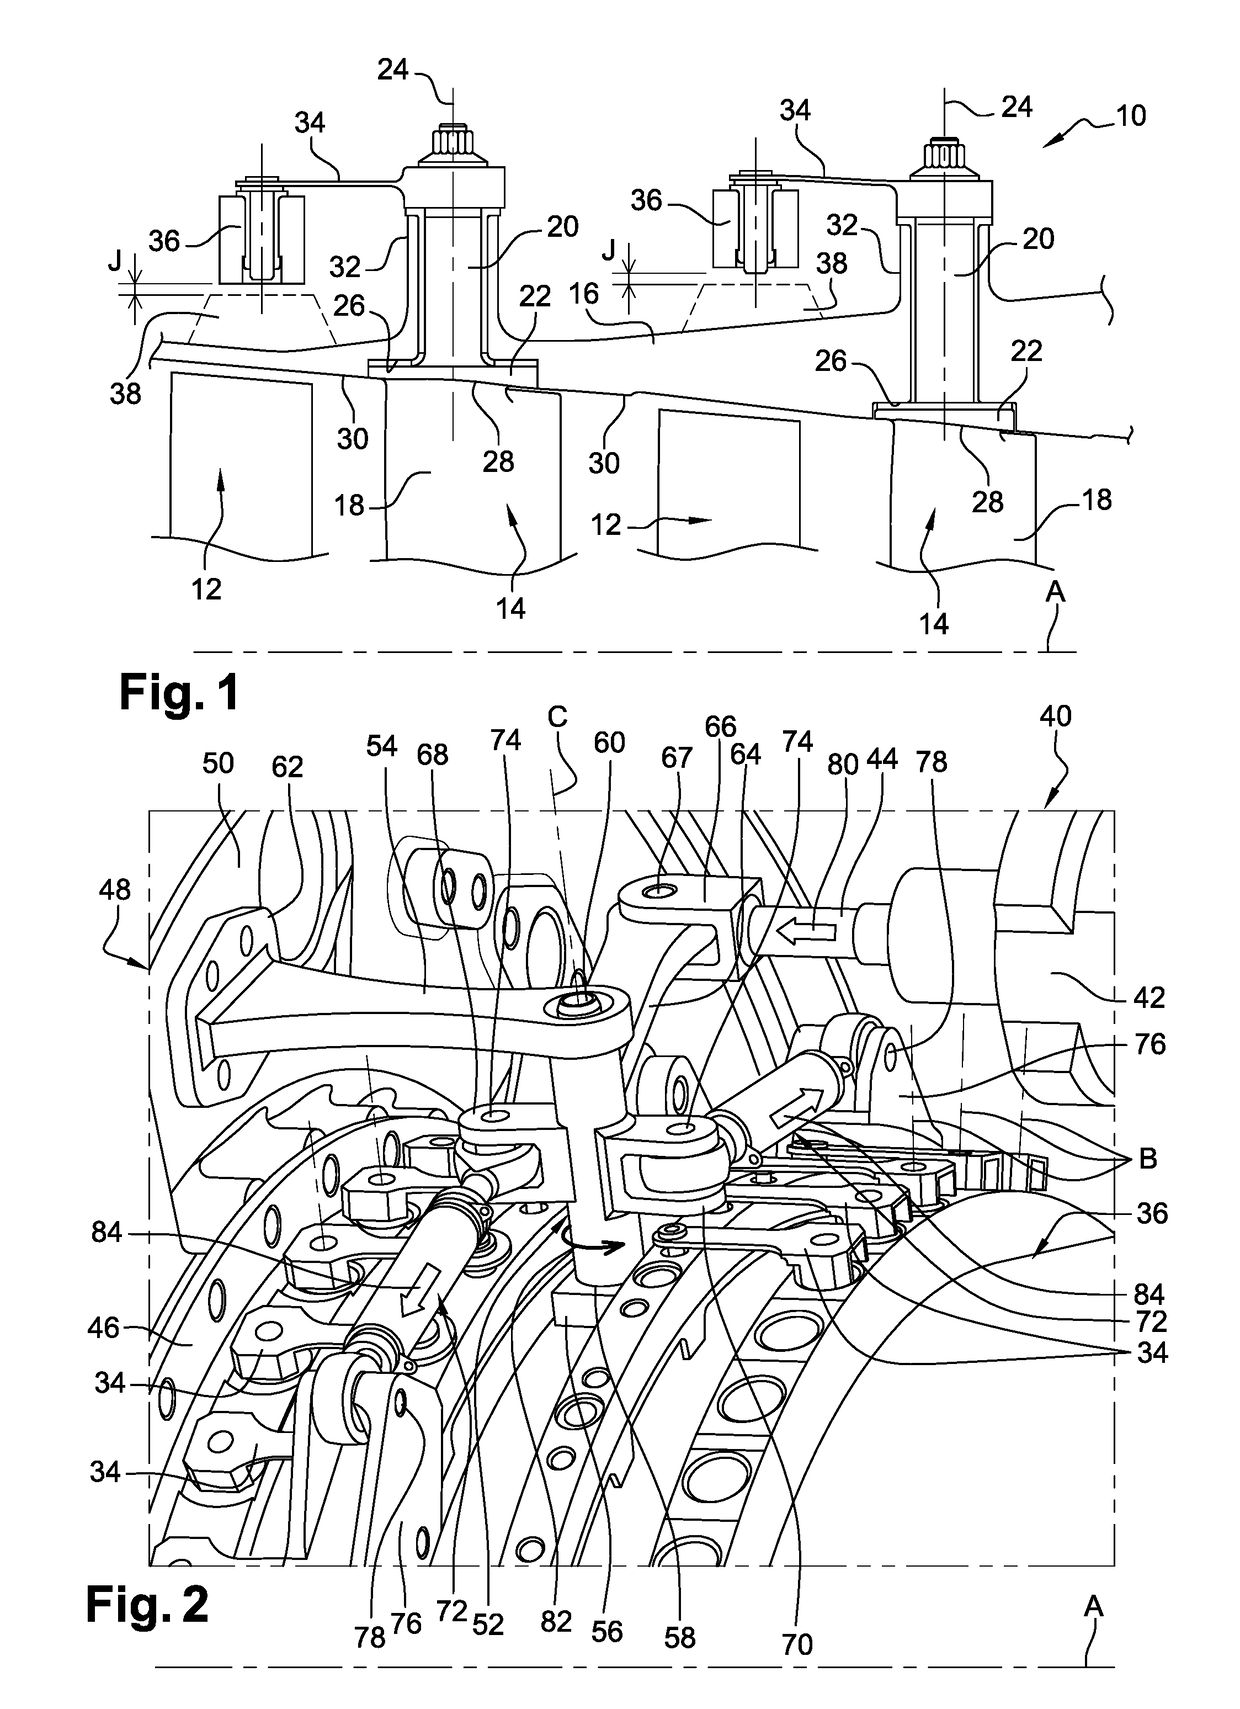 System for controlling variable-setting blades for a turbine engine